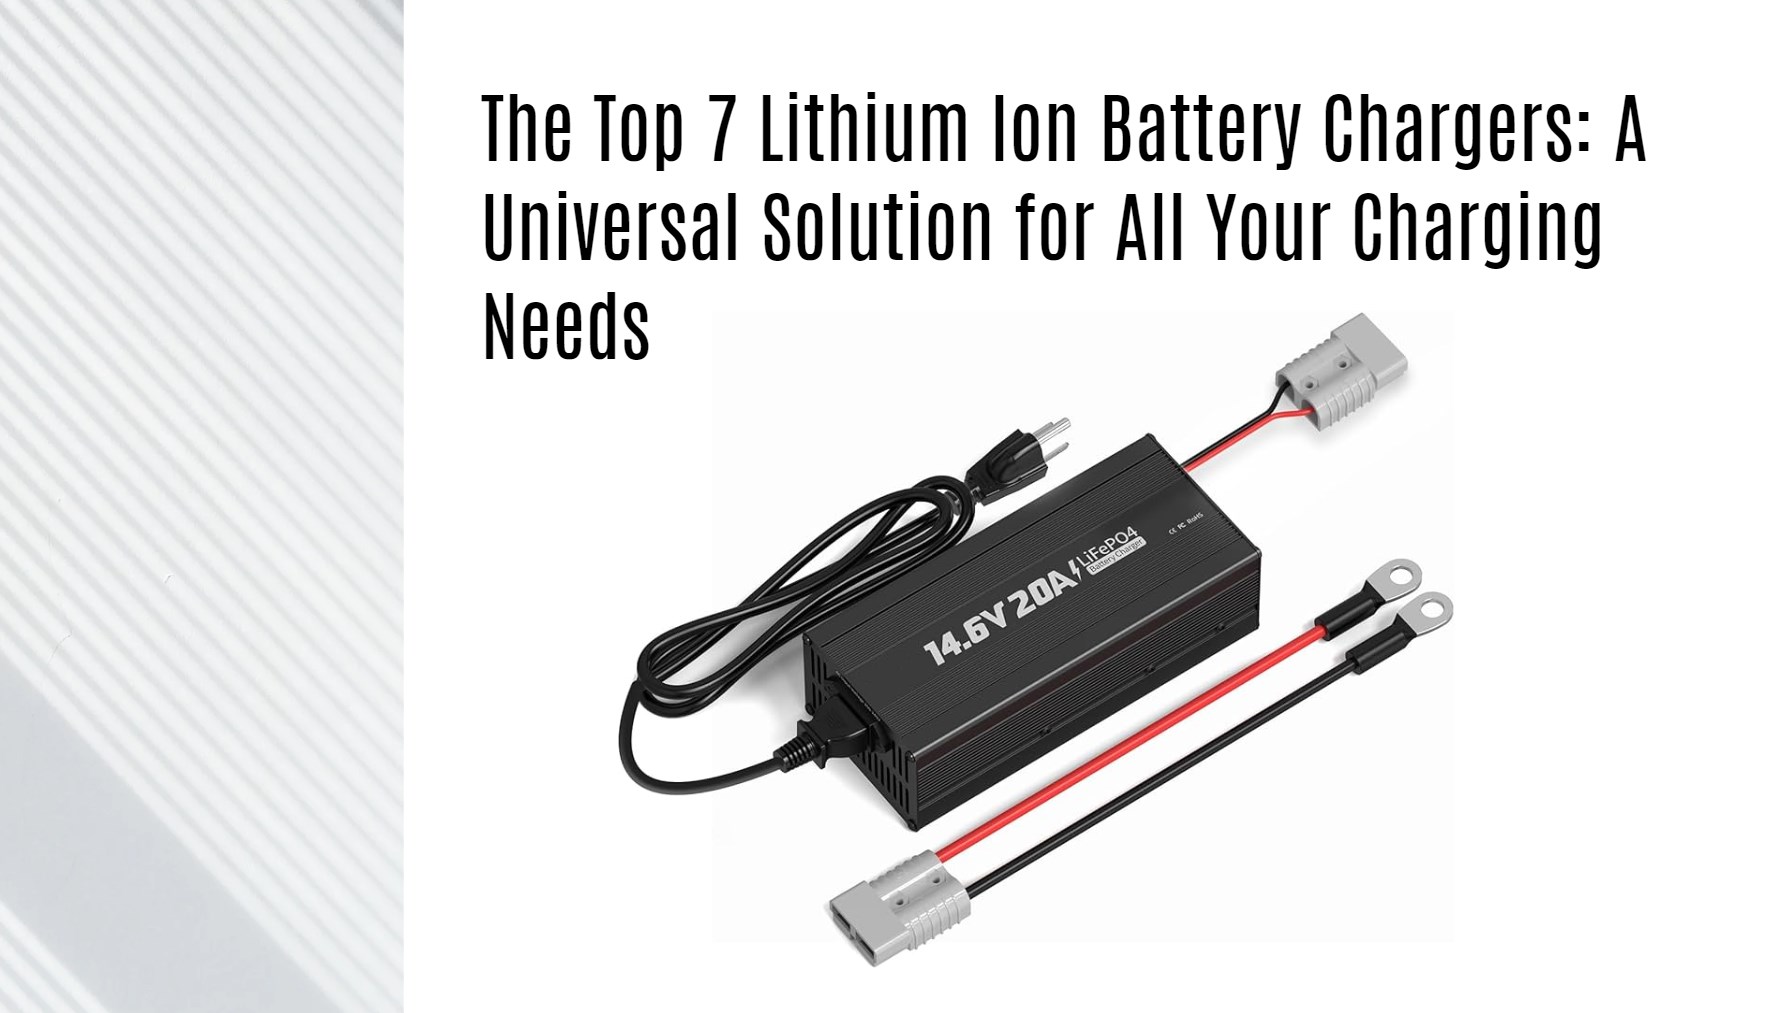 The Top 7 Lithium Ion Battery Chargers: A Universal Solution for All Your Charging Needs